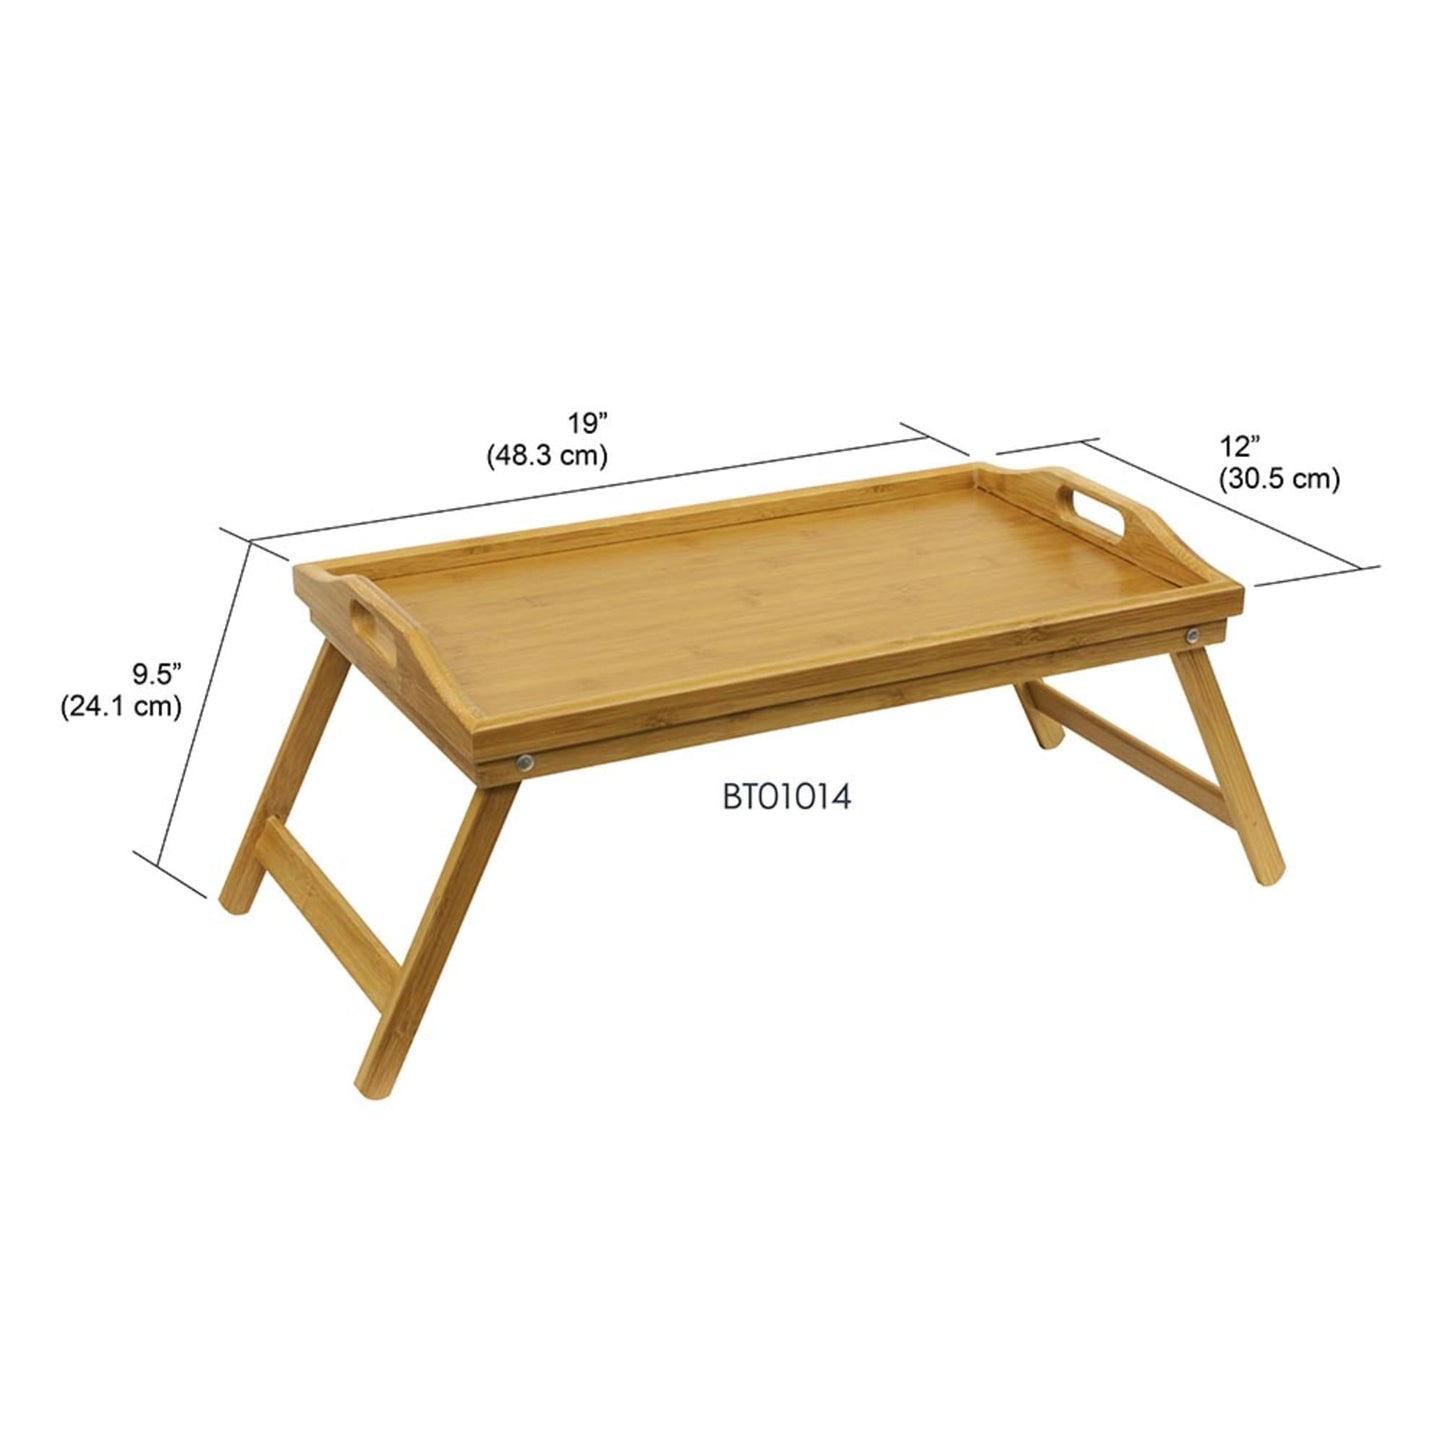 Home-it Bed Tray Table with Folding Legs, and Breakfast Tray Bamboo Bed Table